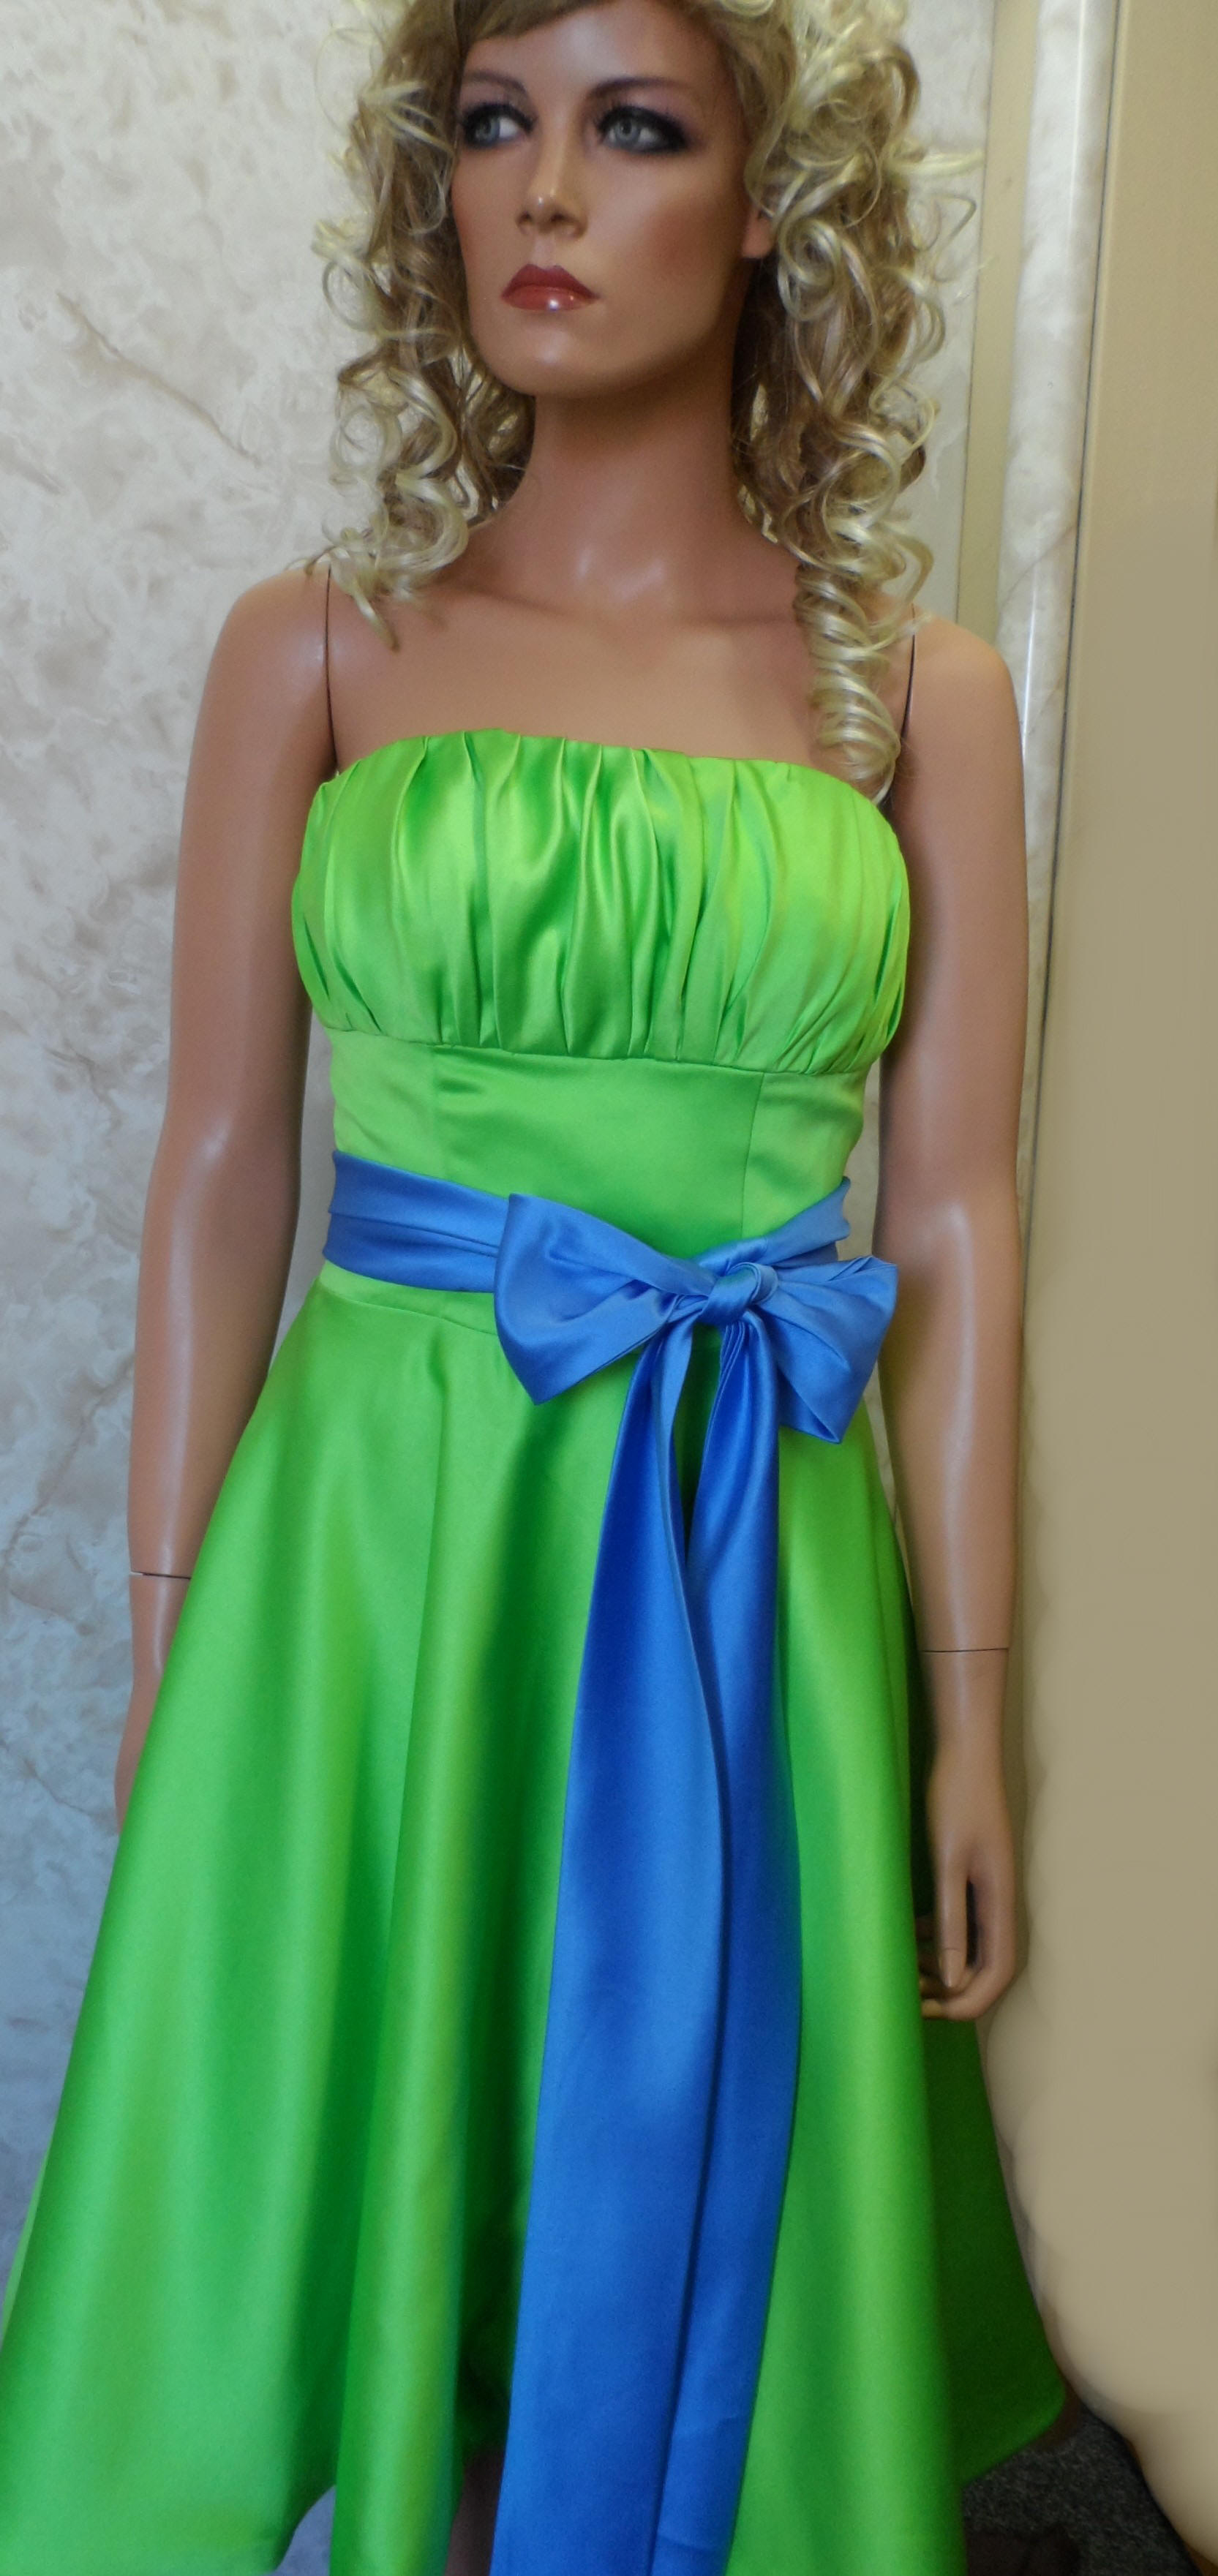 Lime green strapless dress with blue sash